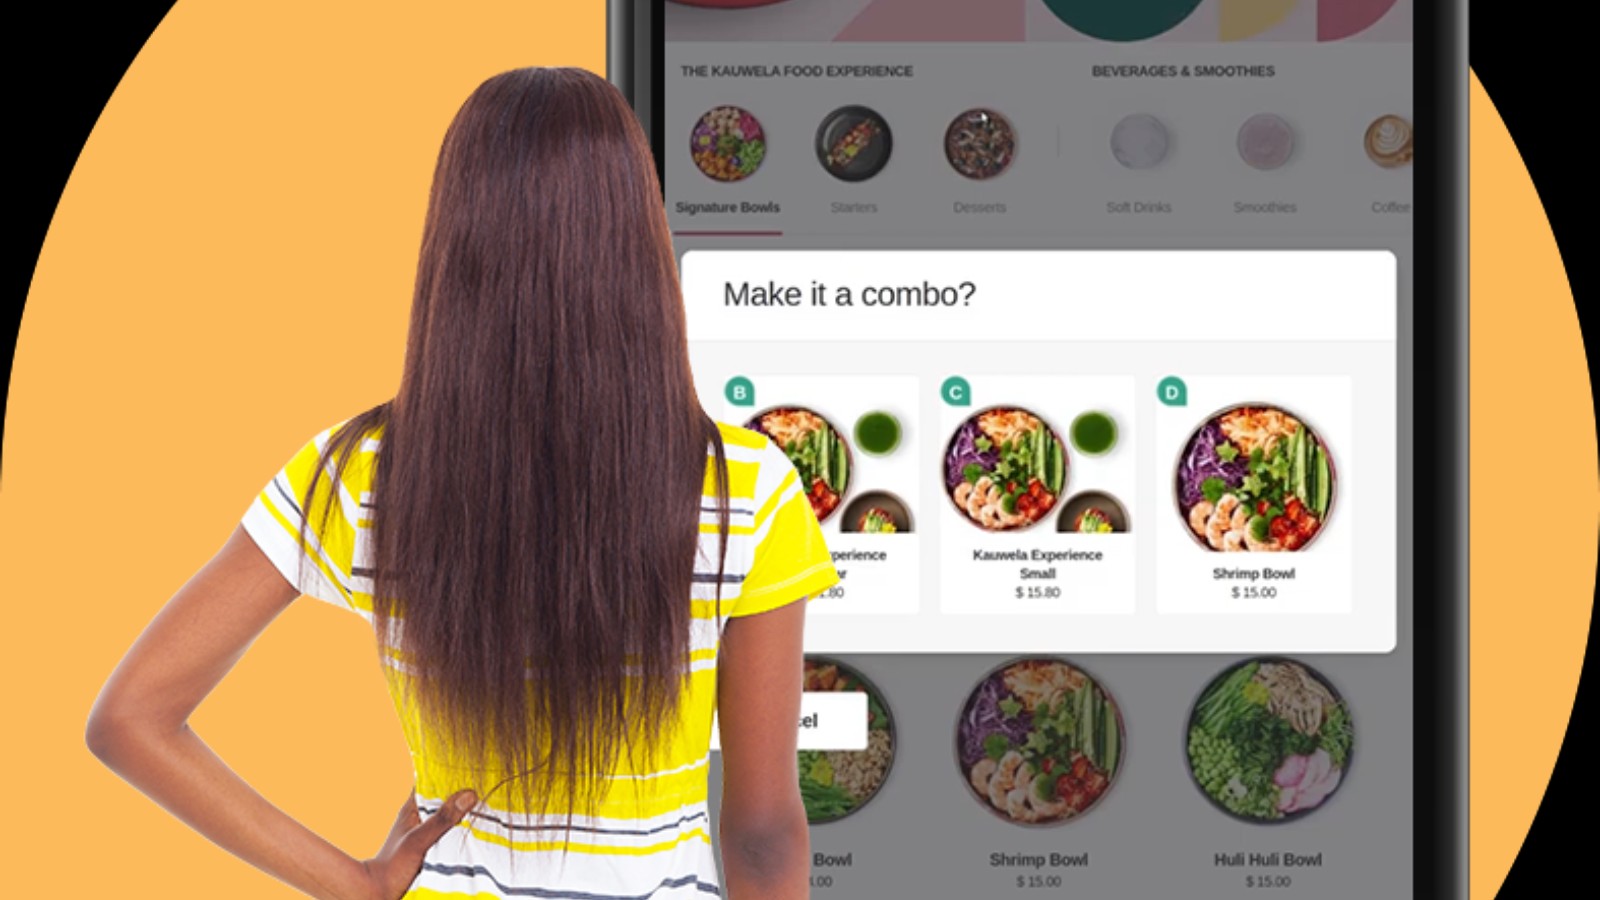 Choosing dishes at a food kiosk no longer has to involve touching the screen. Photo courtesy of Touchless.ai